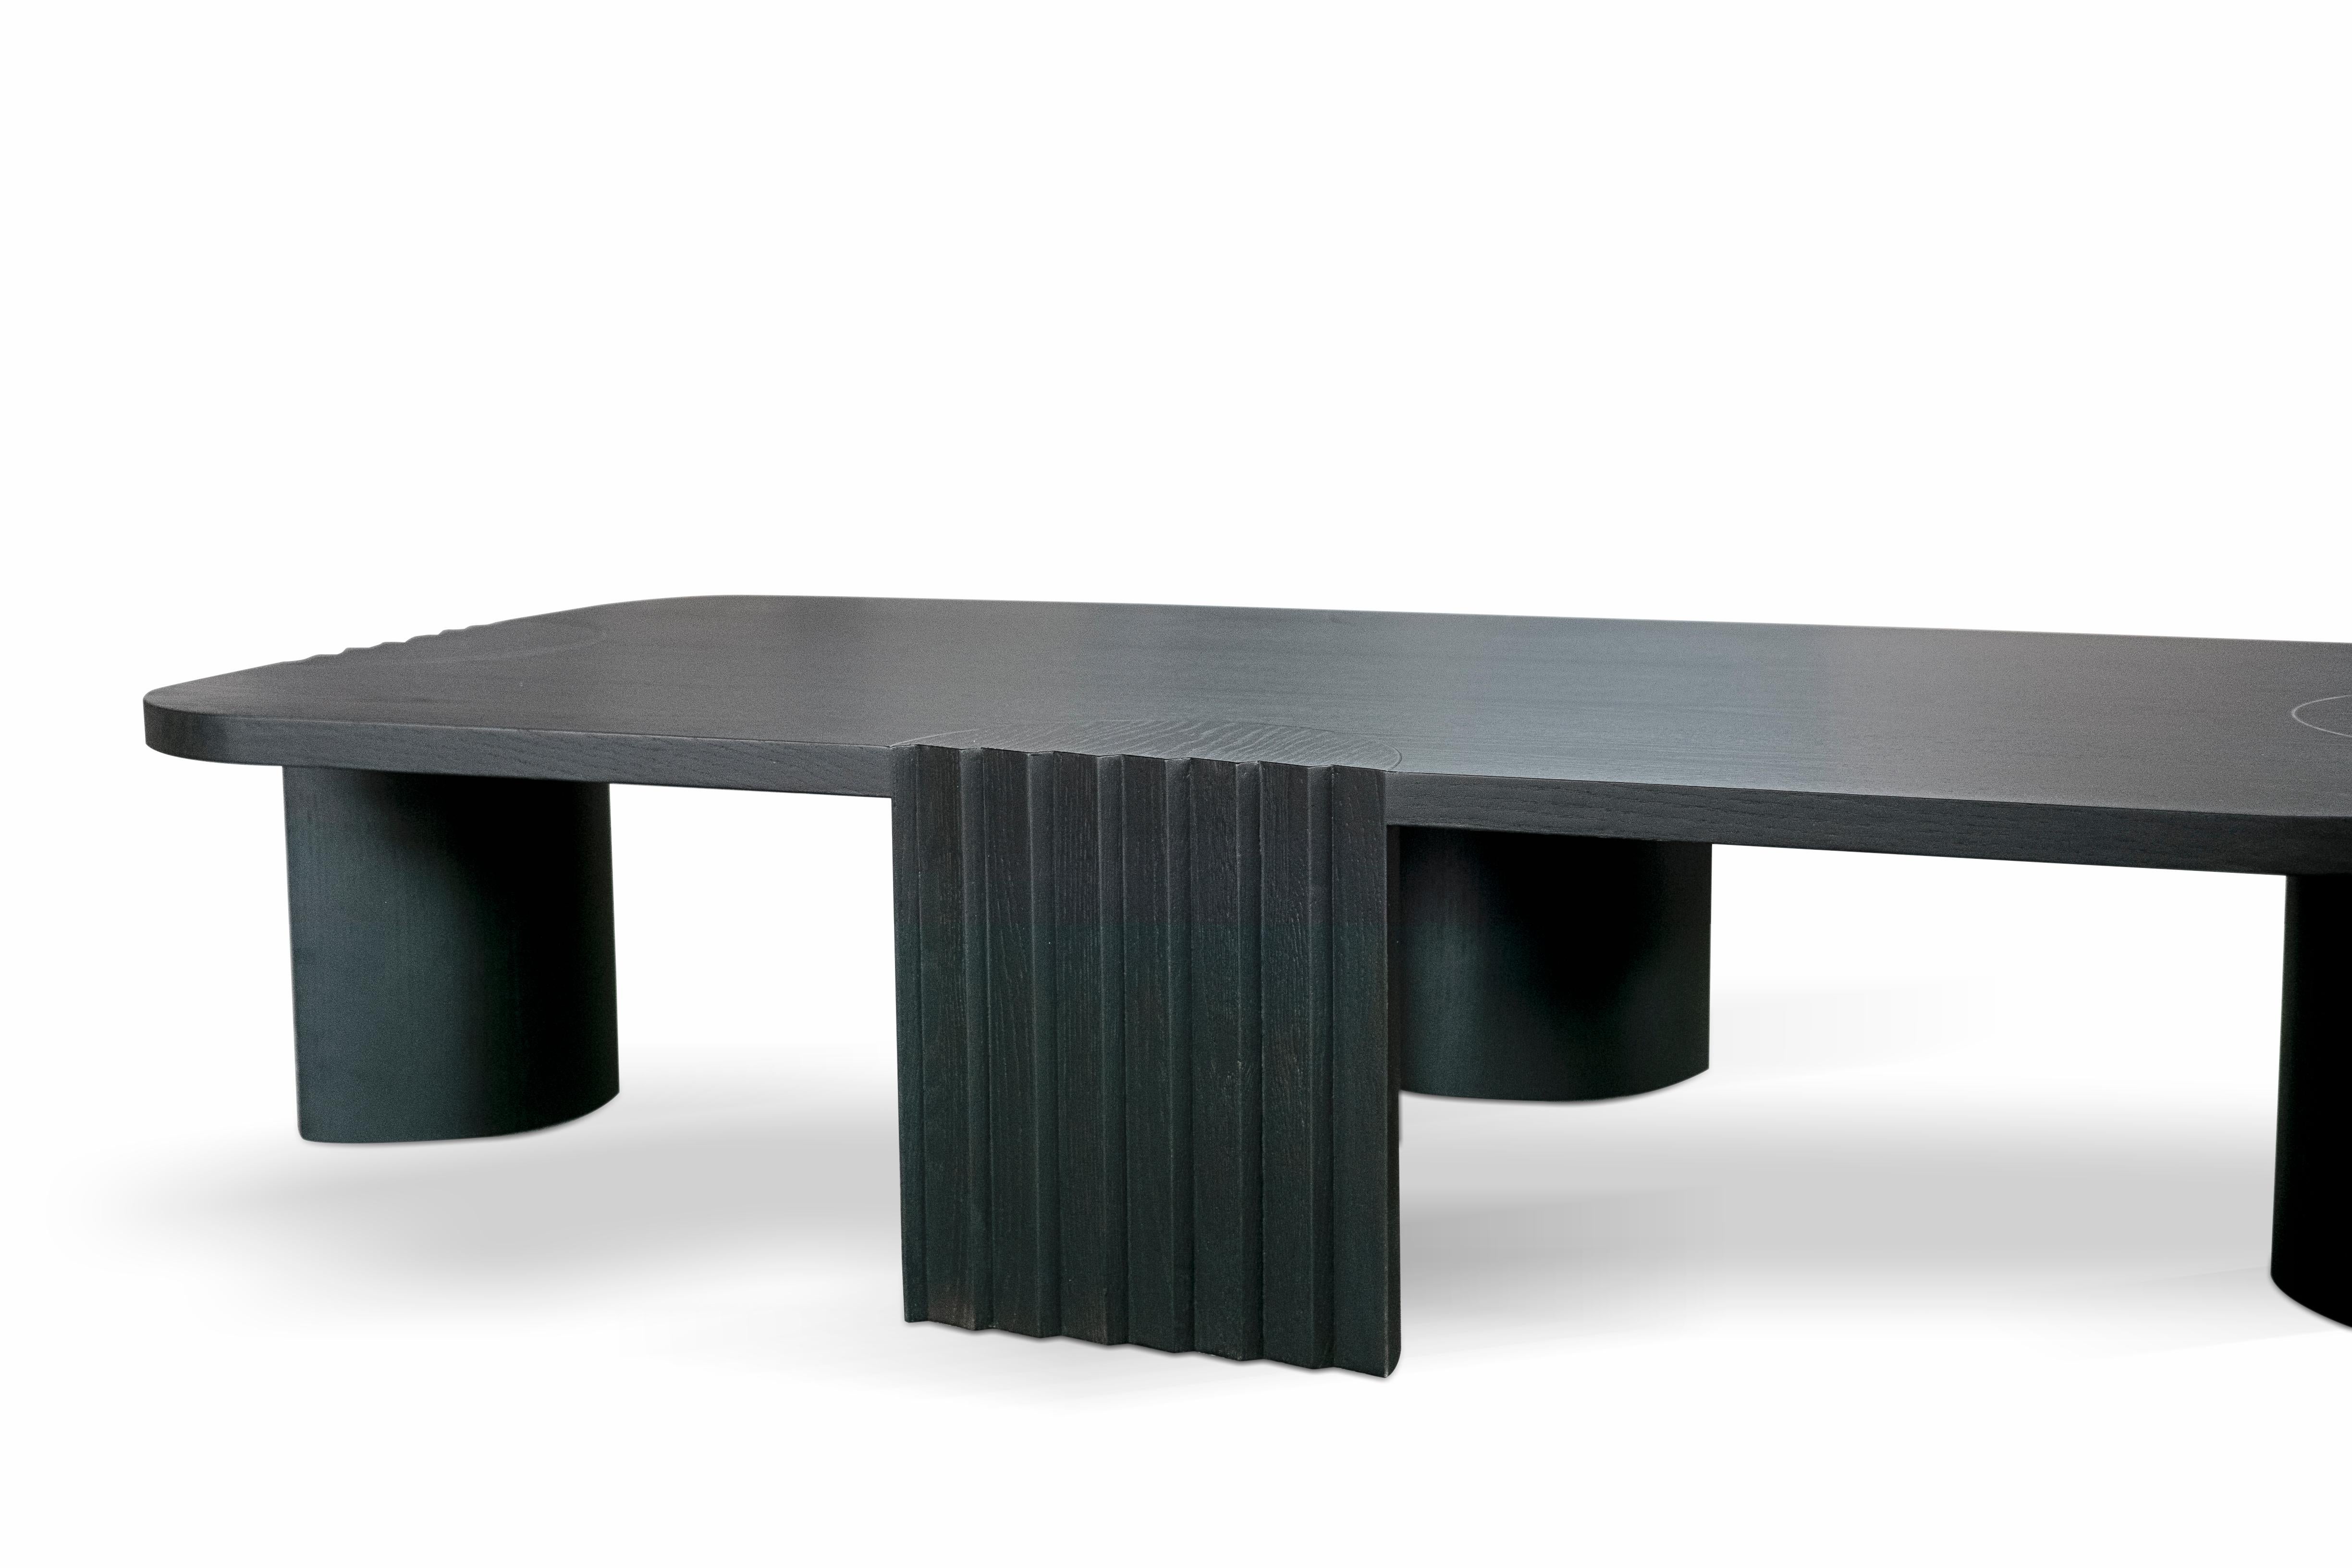 Contemporary Modern European Caravel Low Coffee Table in Black Oak by Collector

21st century Colombo, the Italian explorer, left from Portugal with 3 (as low tables are) Caravels to discover the world.
Inspired by the different materials used on